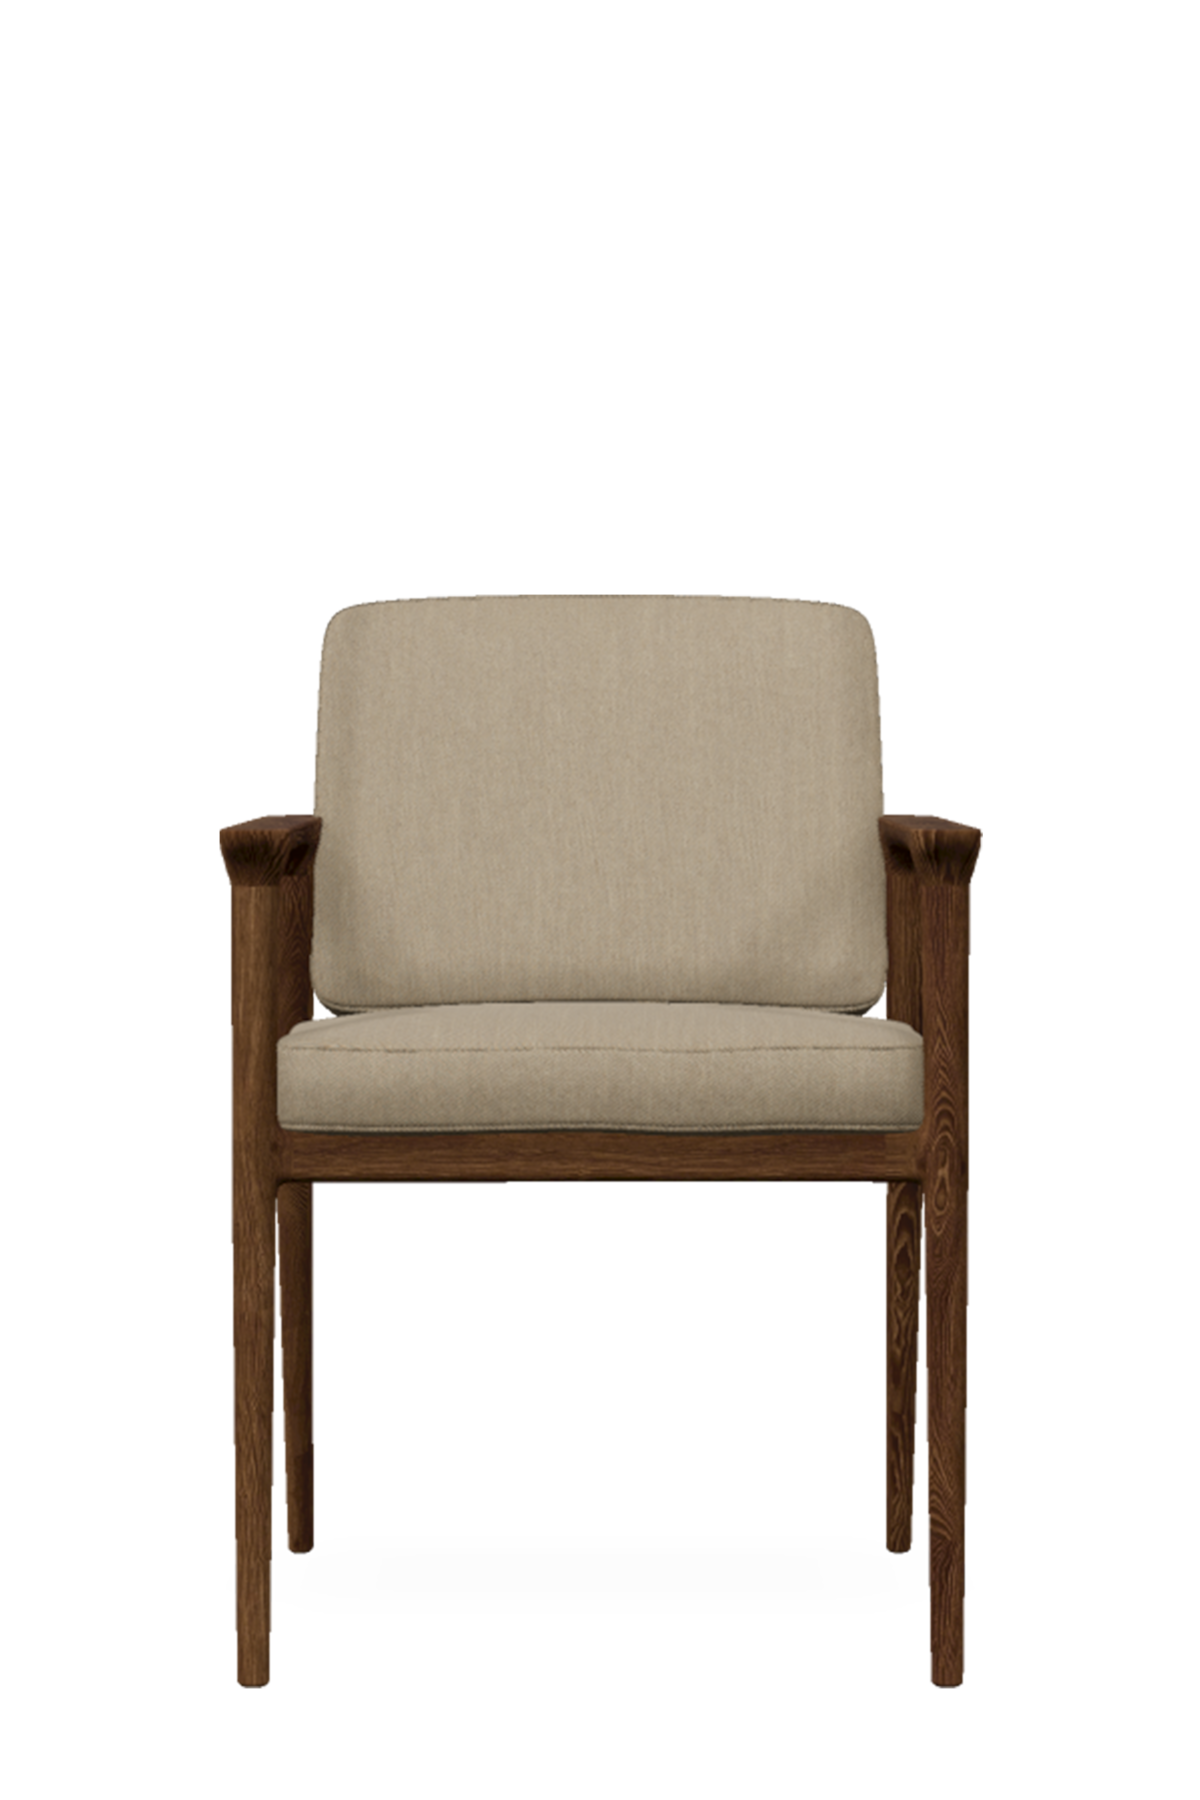 Zio Dining Chair Oray Gravel seat with Cinnamon wood legs front view